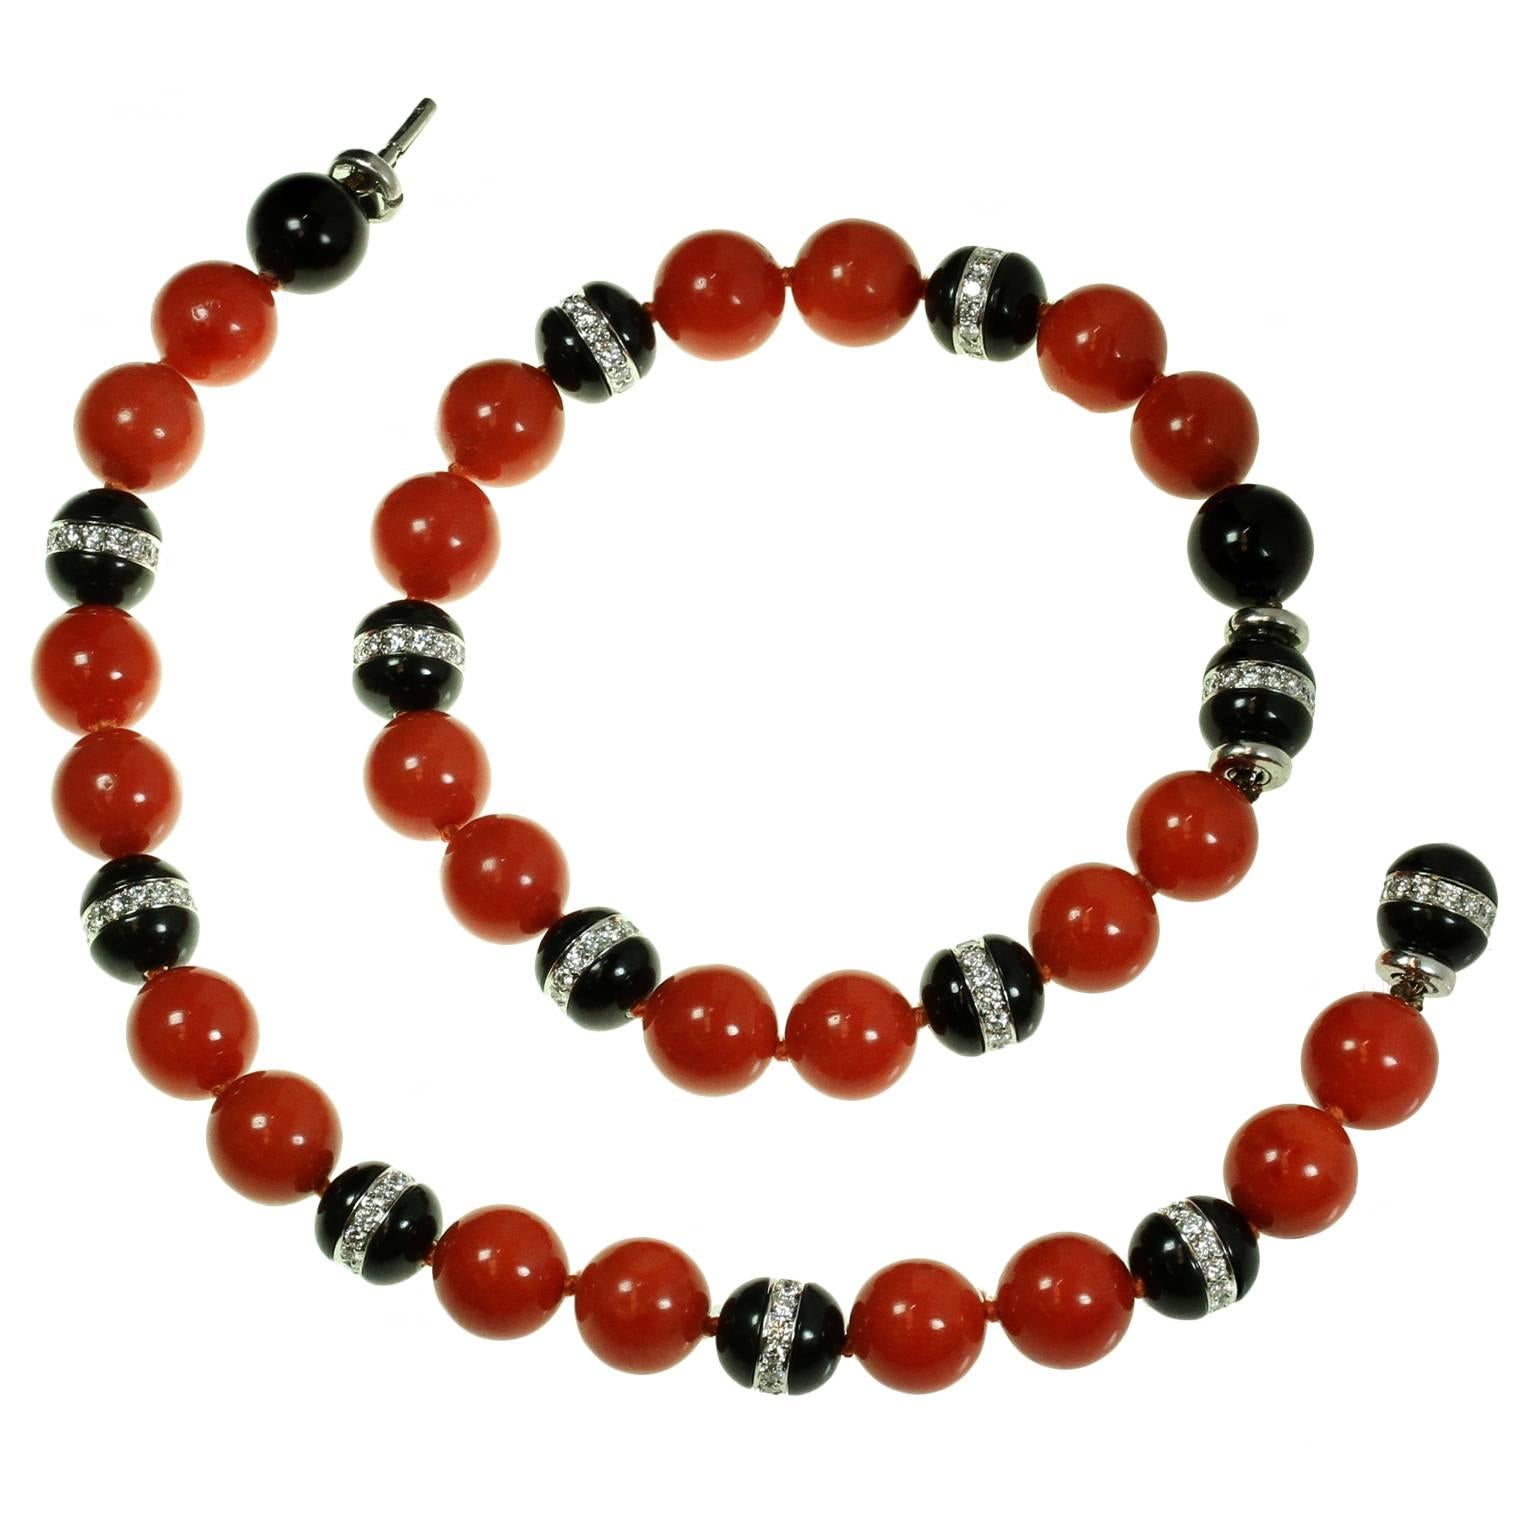 Tiffany & Co. Natural Oxblood Coral Onyx Diamond Bead Bracelet Pair or Necklace